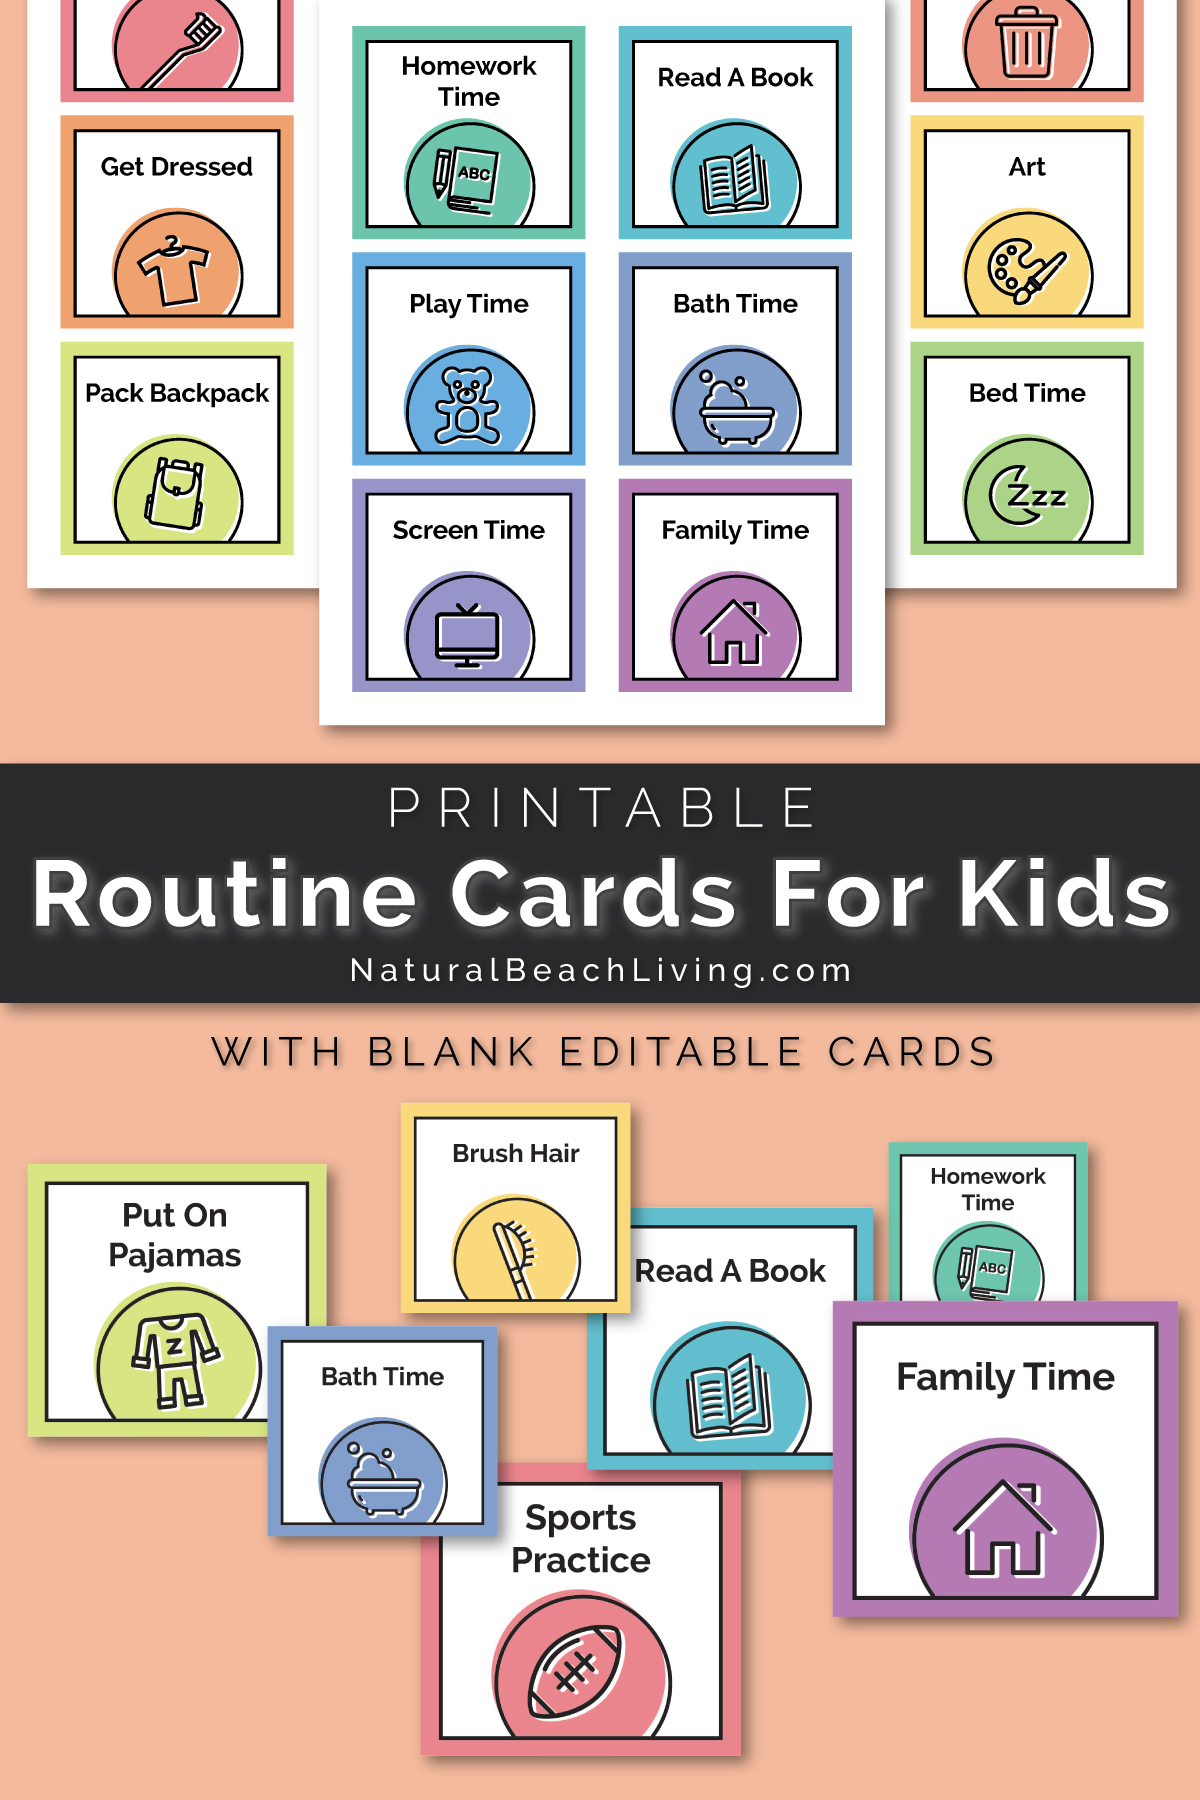 Visual Schedule - Free Printable Routine Cards - Natural Beach Living - Free Printable Schedule Cards